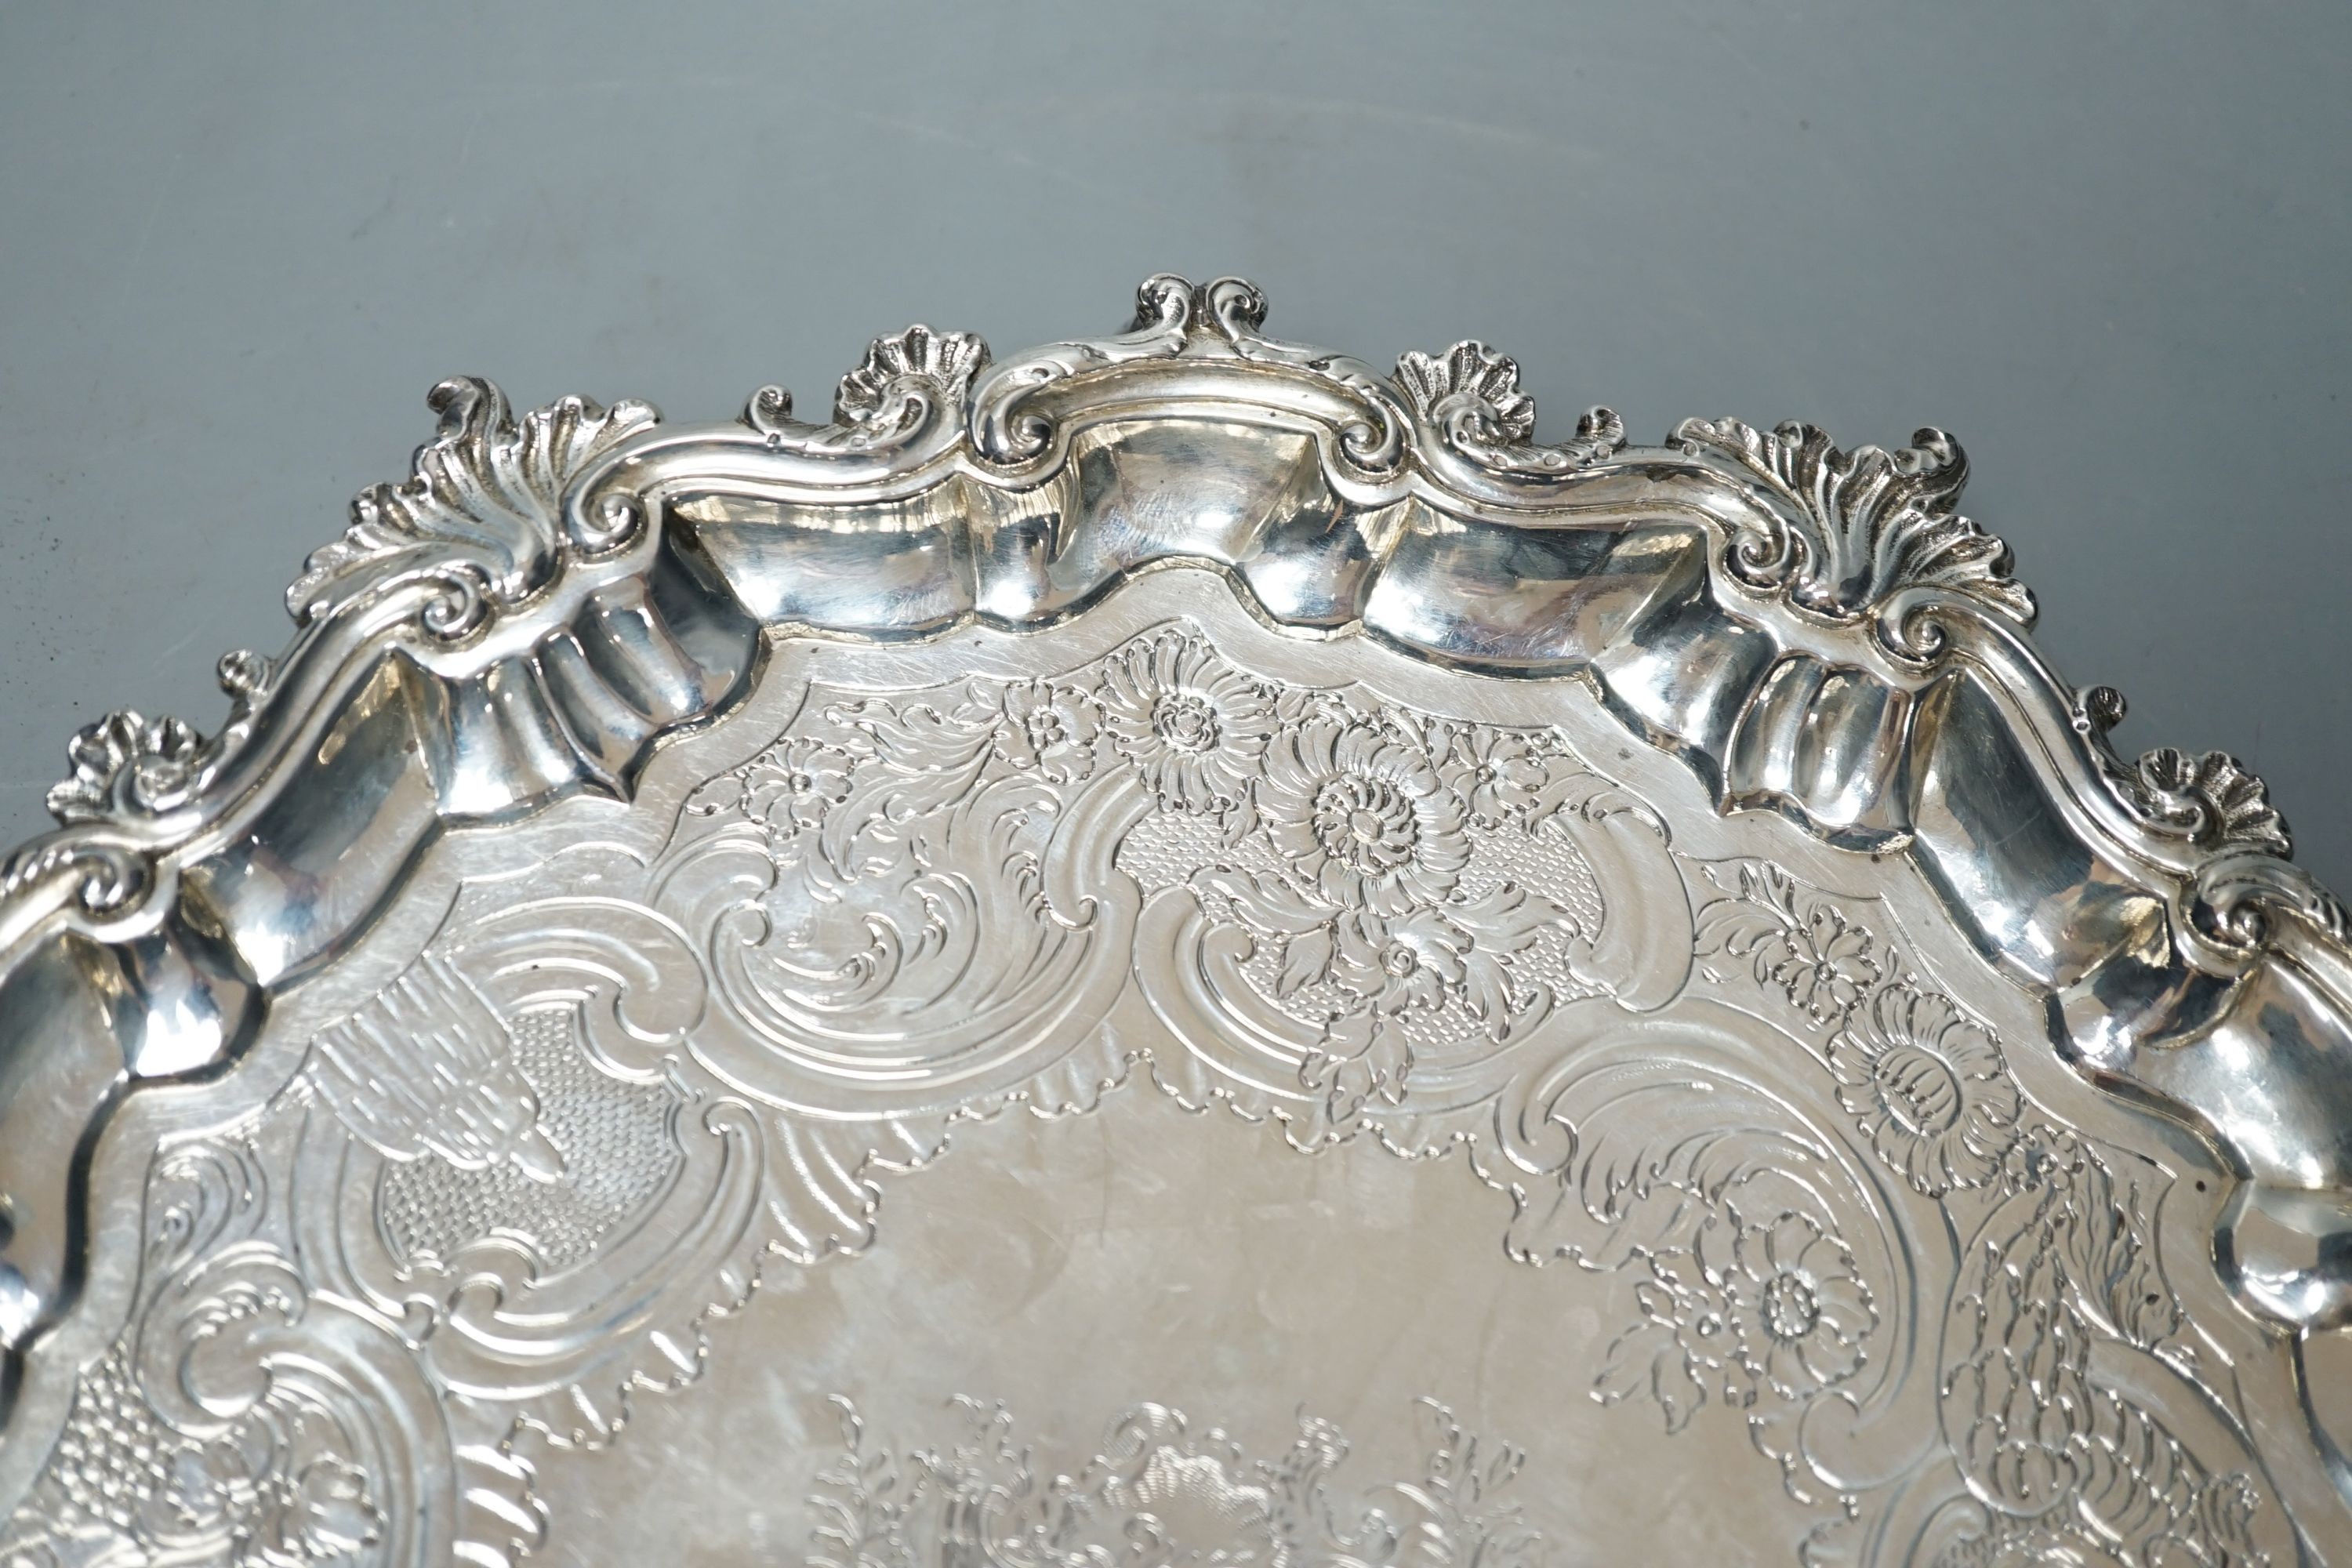 A George II silver salver, Hugh Mills, London, 1748, with later engraved decoration, 28.6cm, 25.5 oz (a.f.).